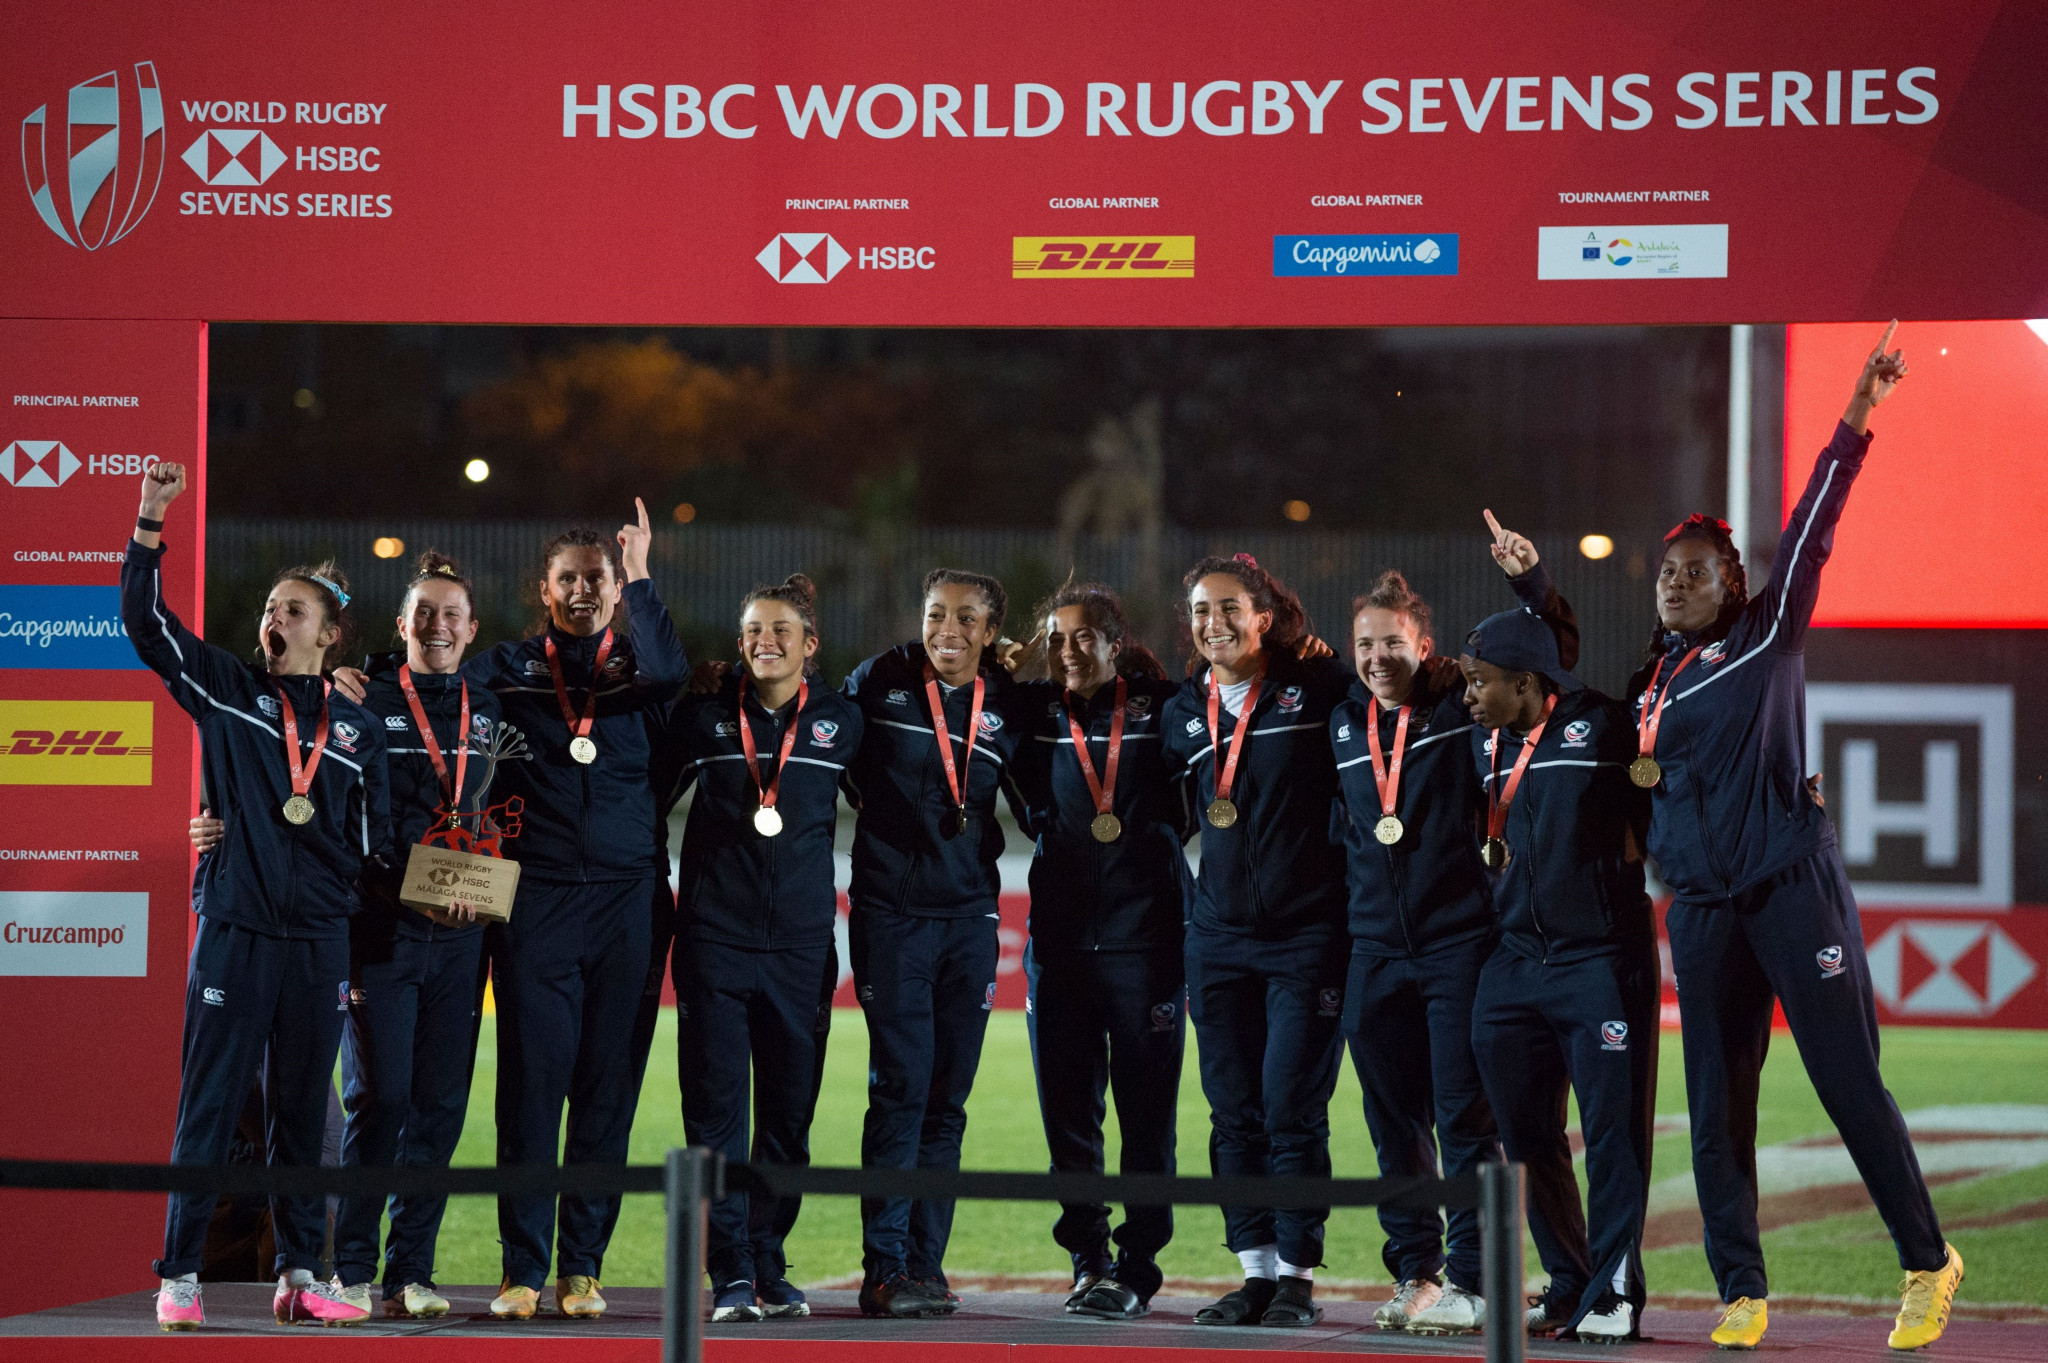 More women's teams are set to be included in the World Rugby Senves Series ©Getty Images